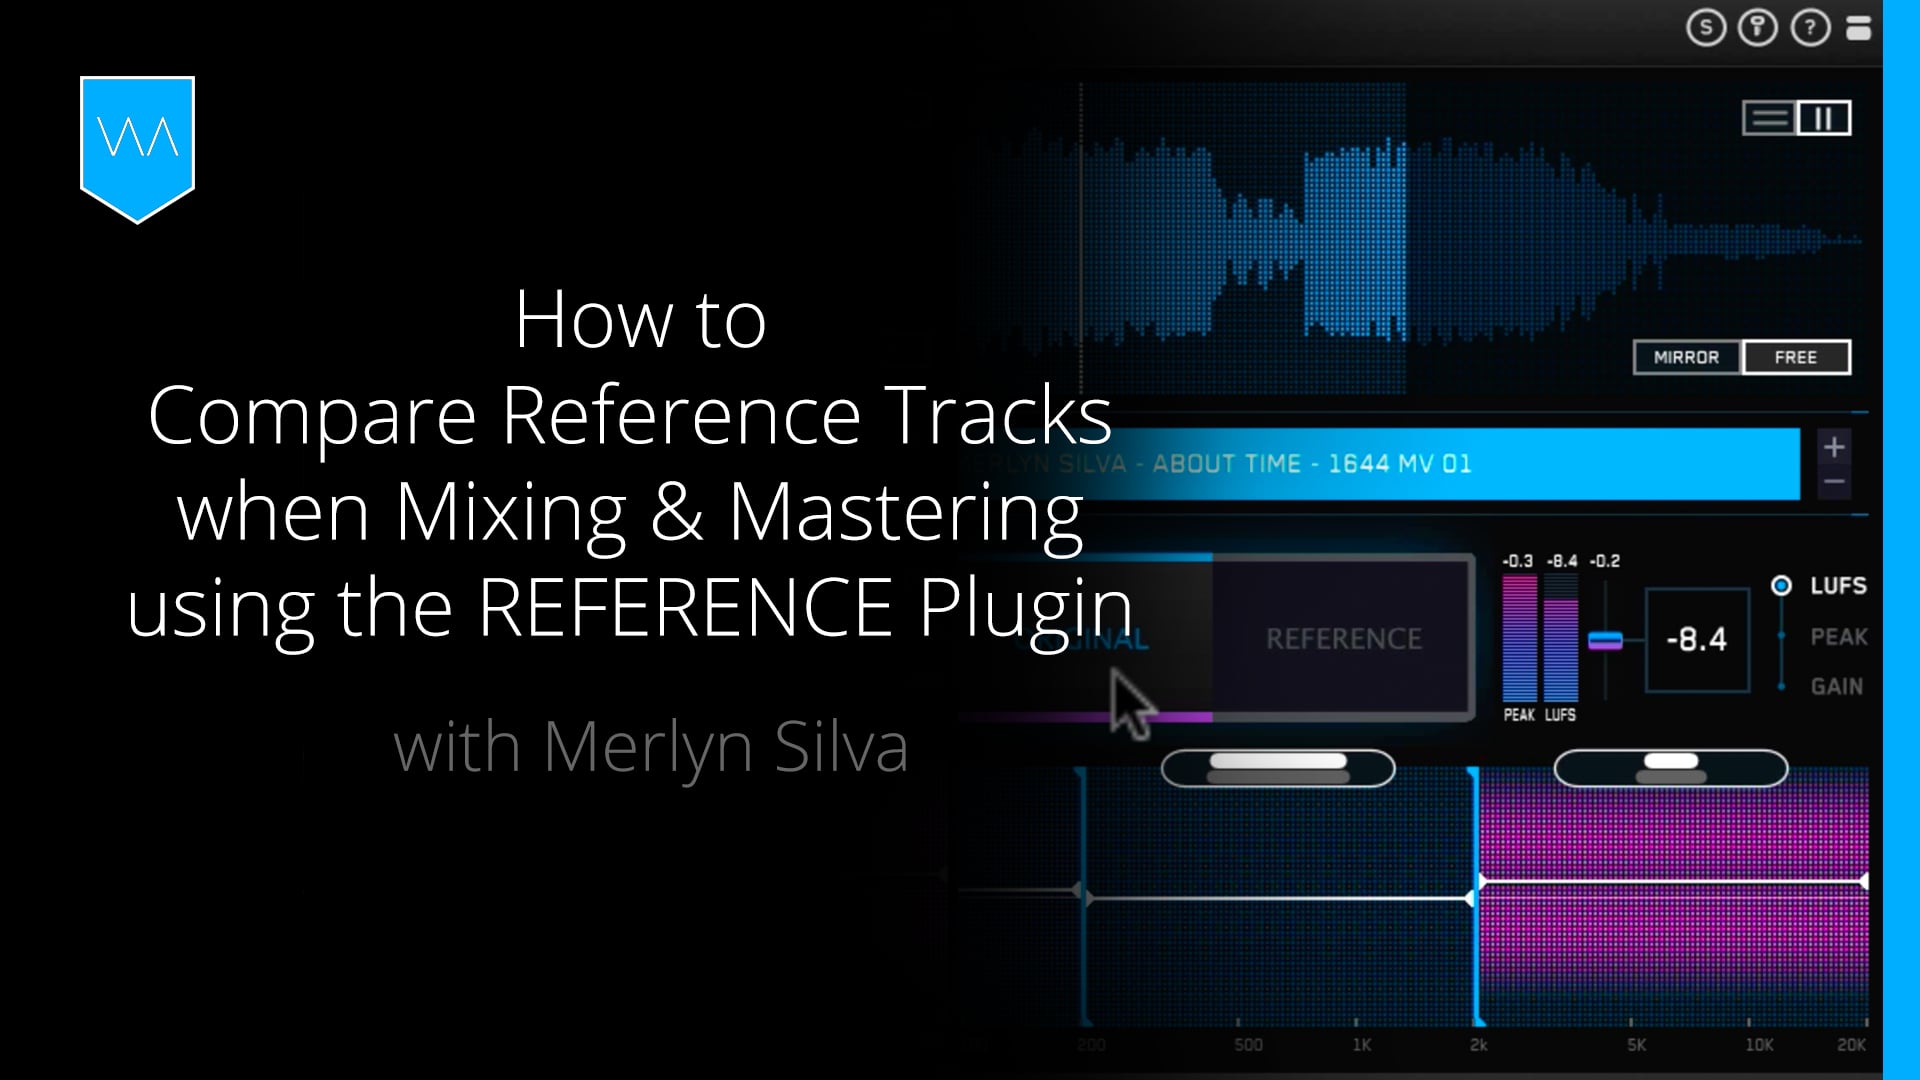 How to Compare Reference for Mixing & Mastering with the REFERENCE [In-Depth Tutorial] on Vimeo